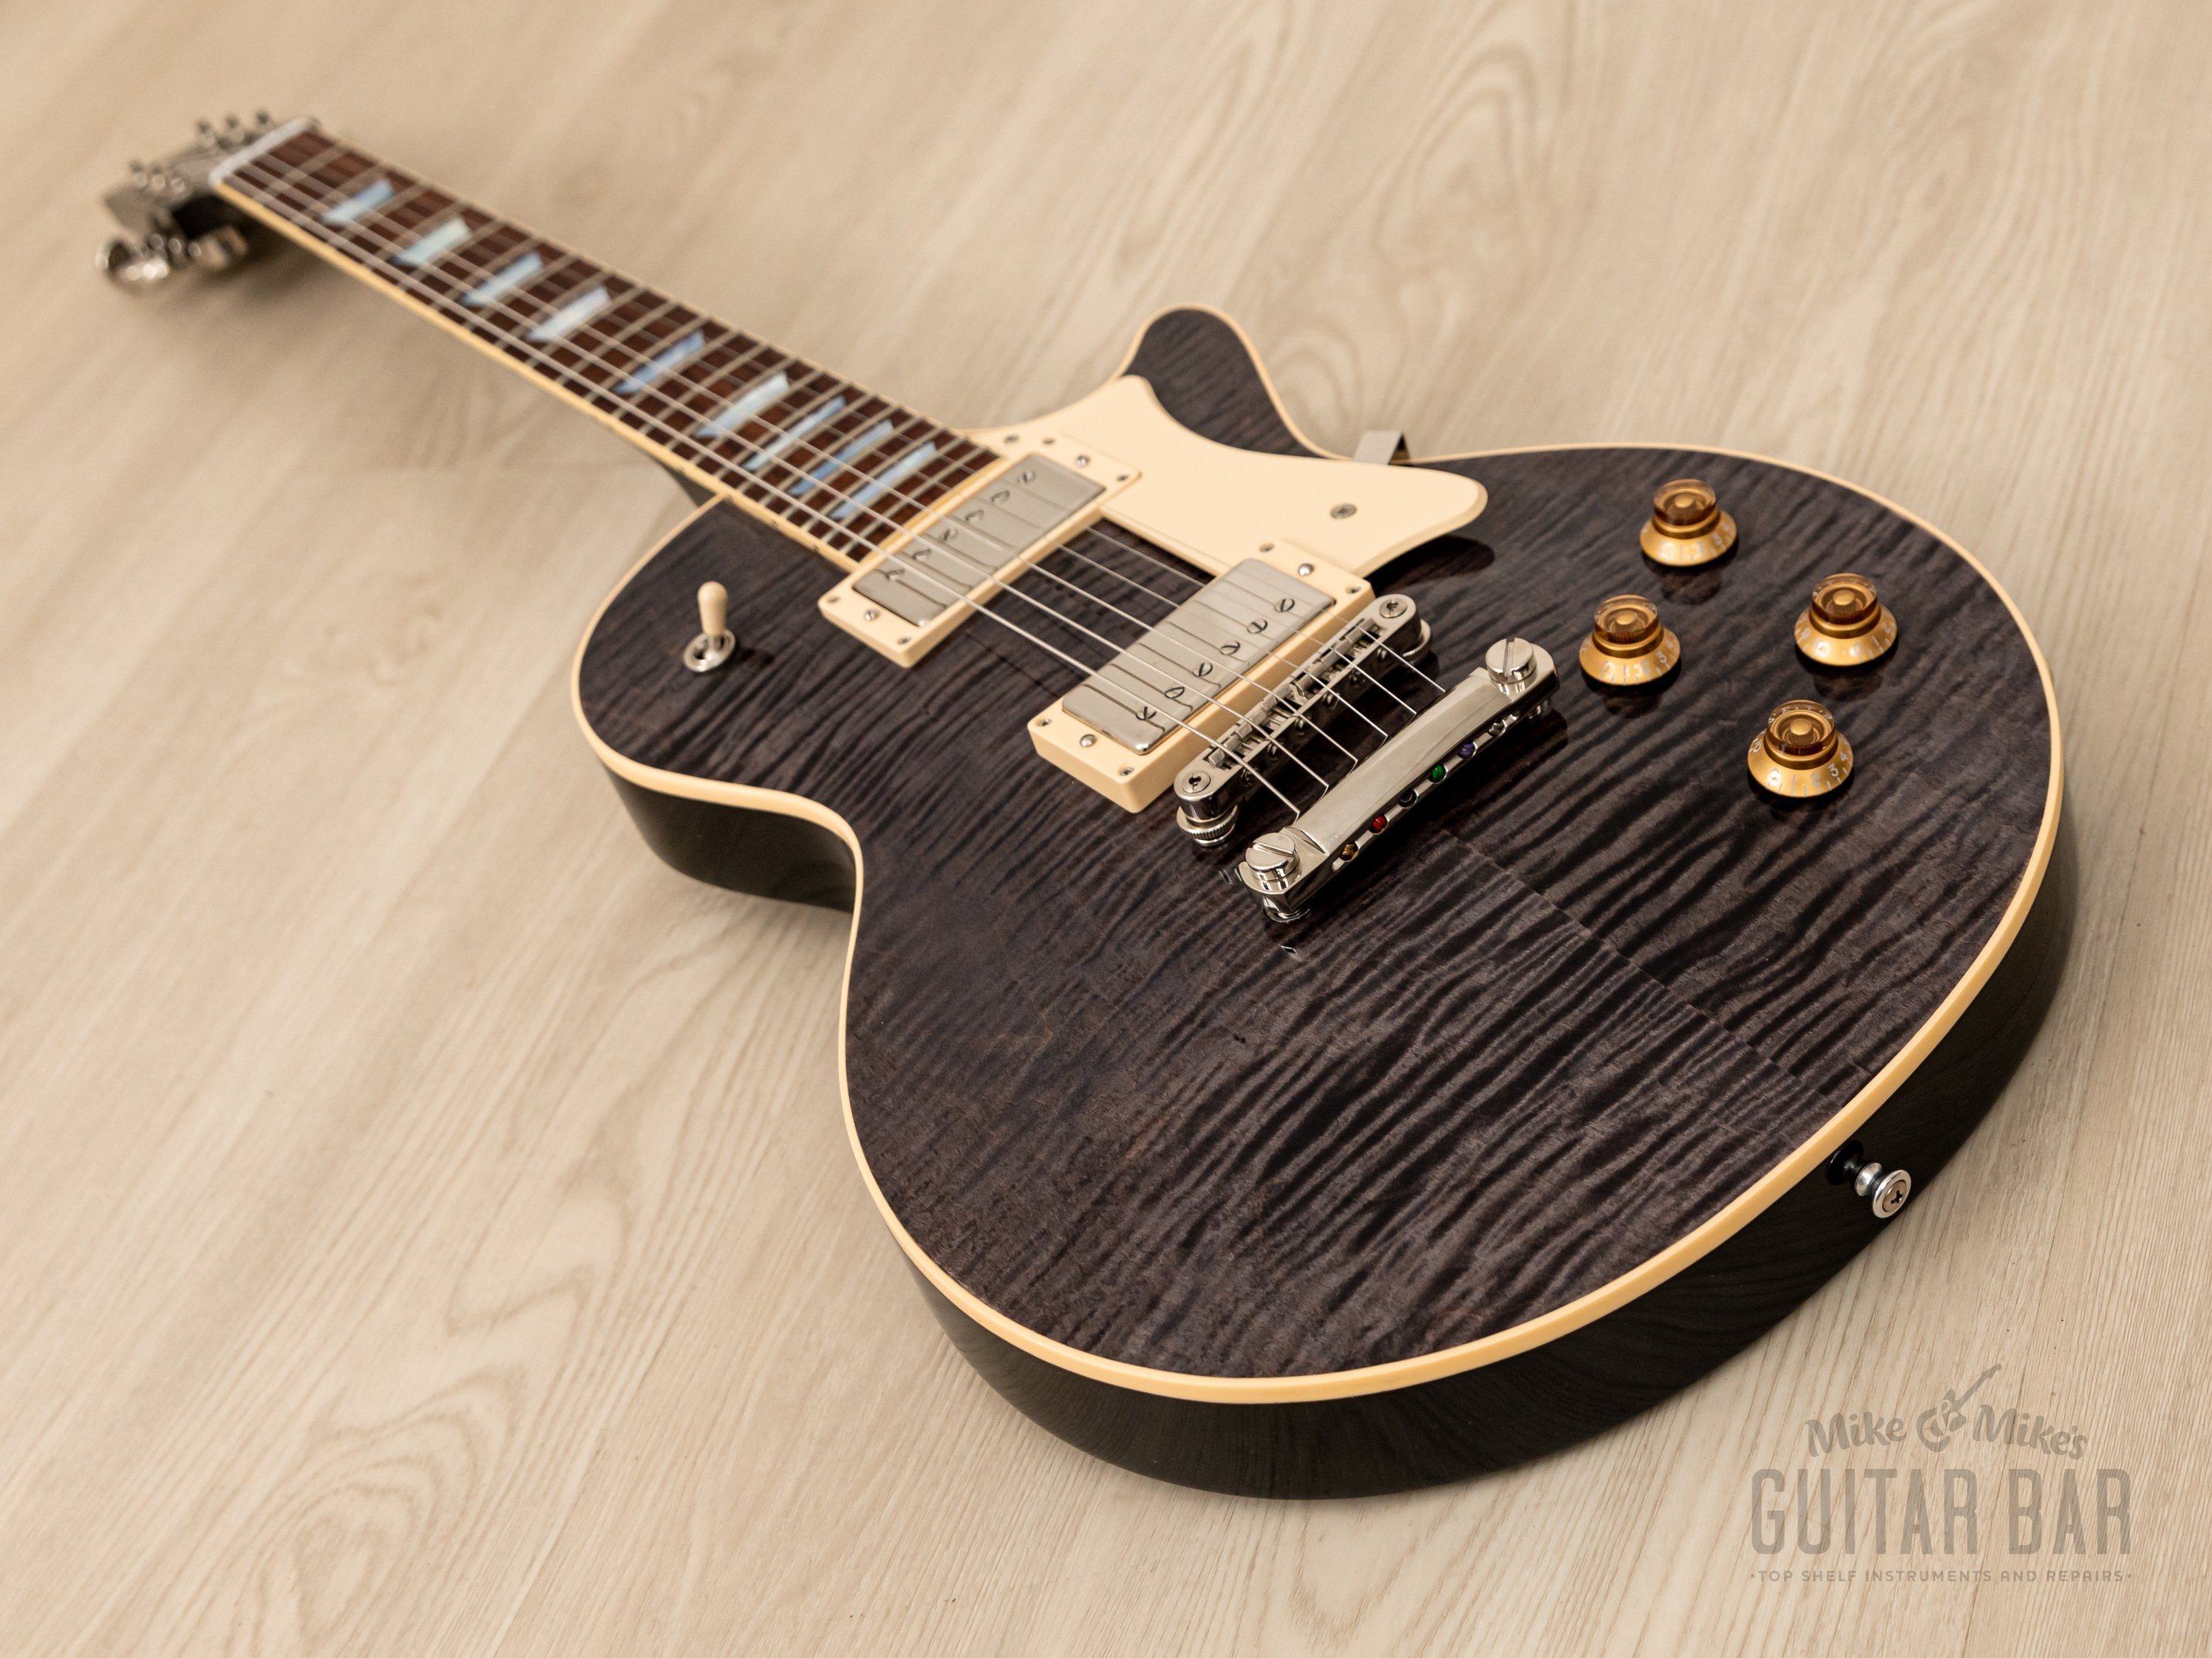 2020 Heritage H-150 Flame Top Black Translucent, Near-Mint w/ Duncan SH-1 PAFs, Case & Tags, Kalamazoo USA-Made